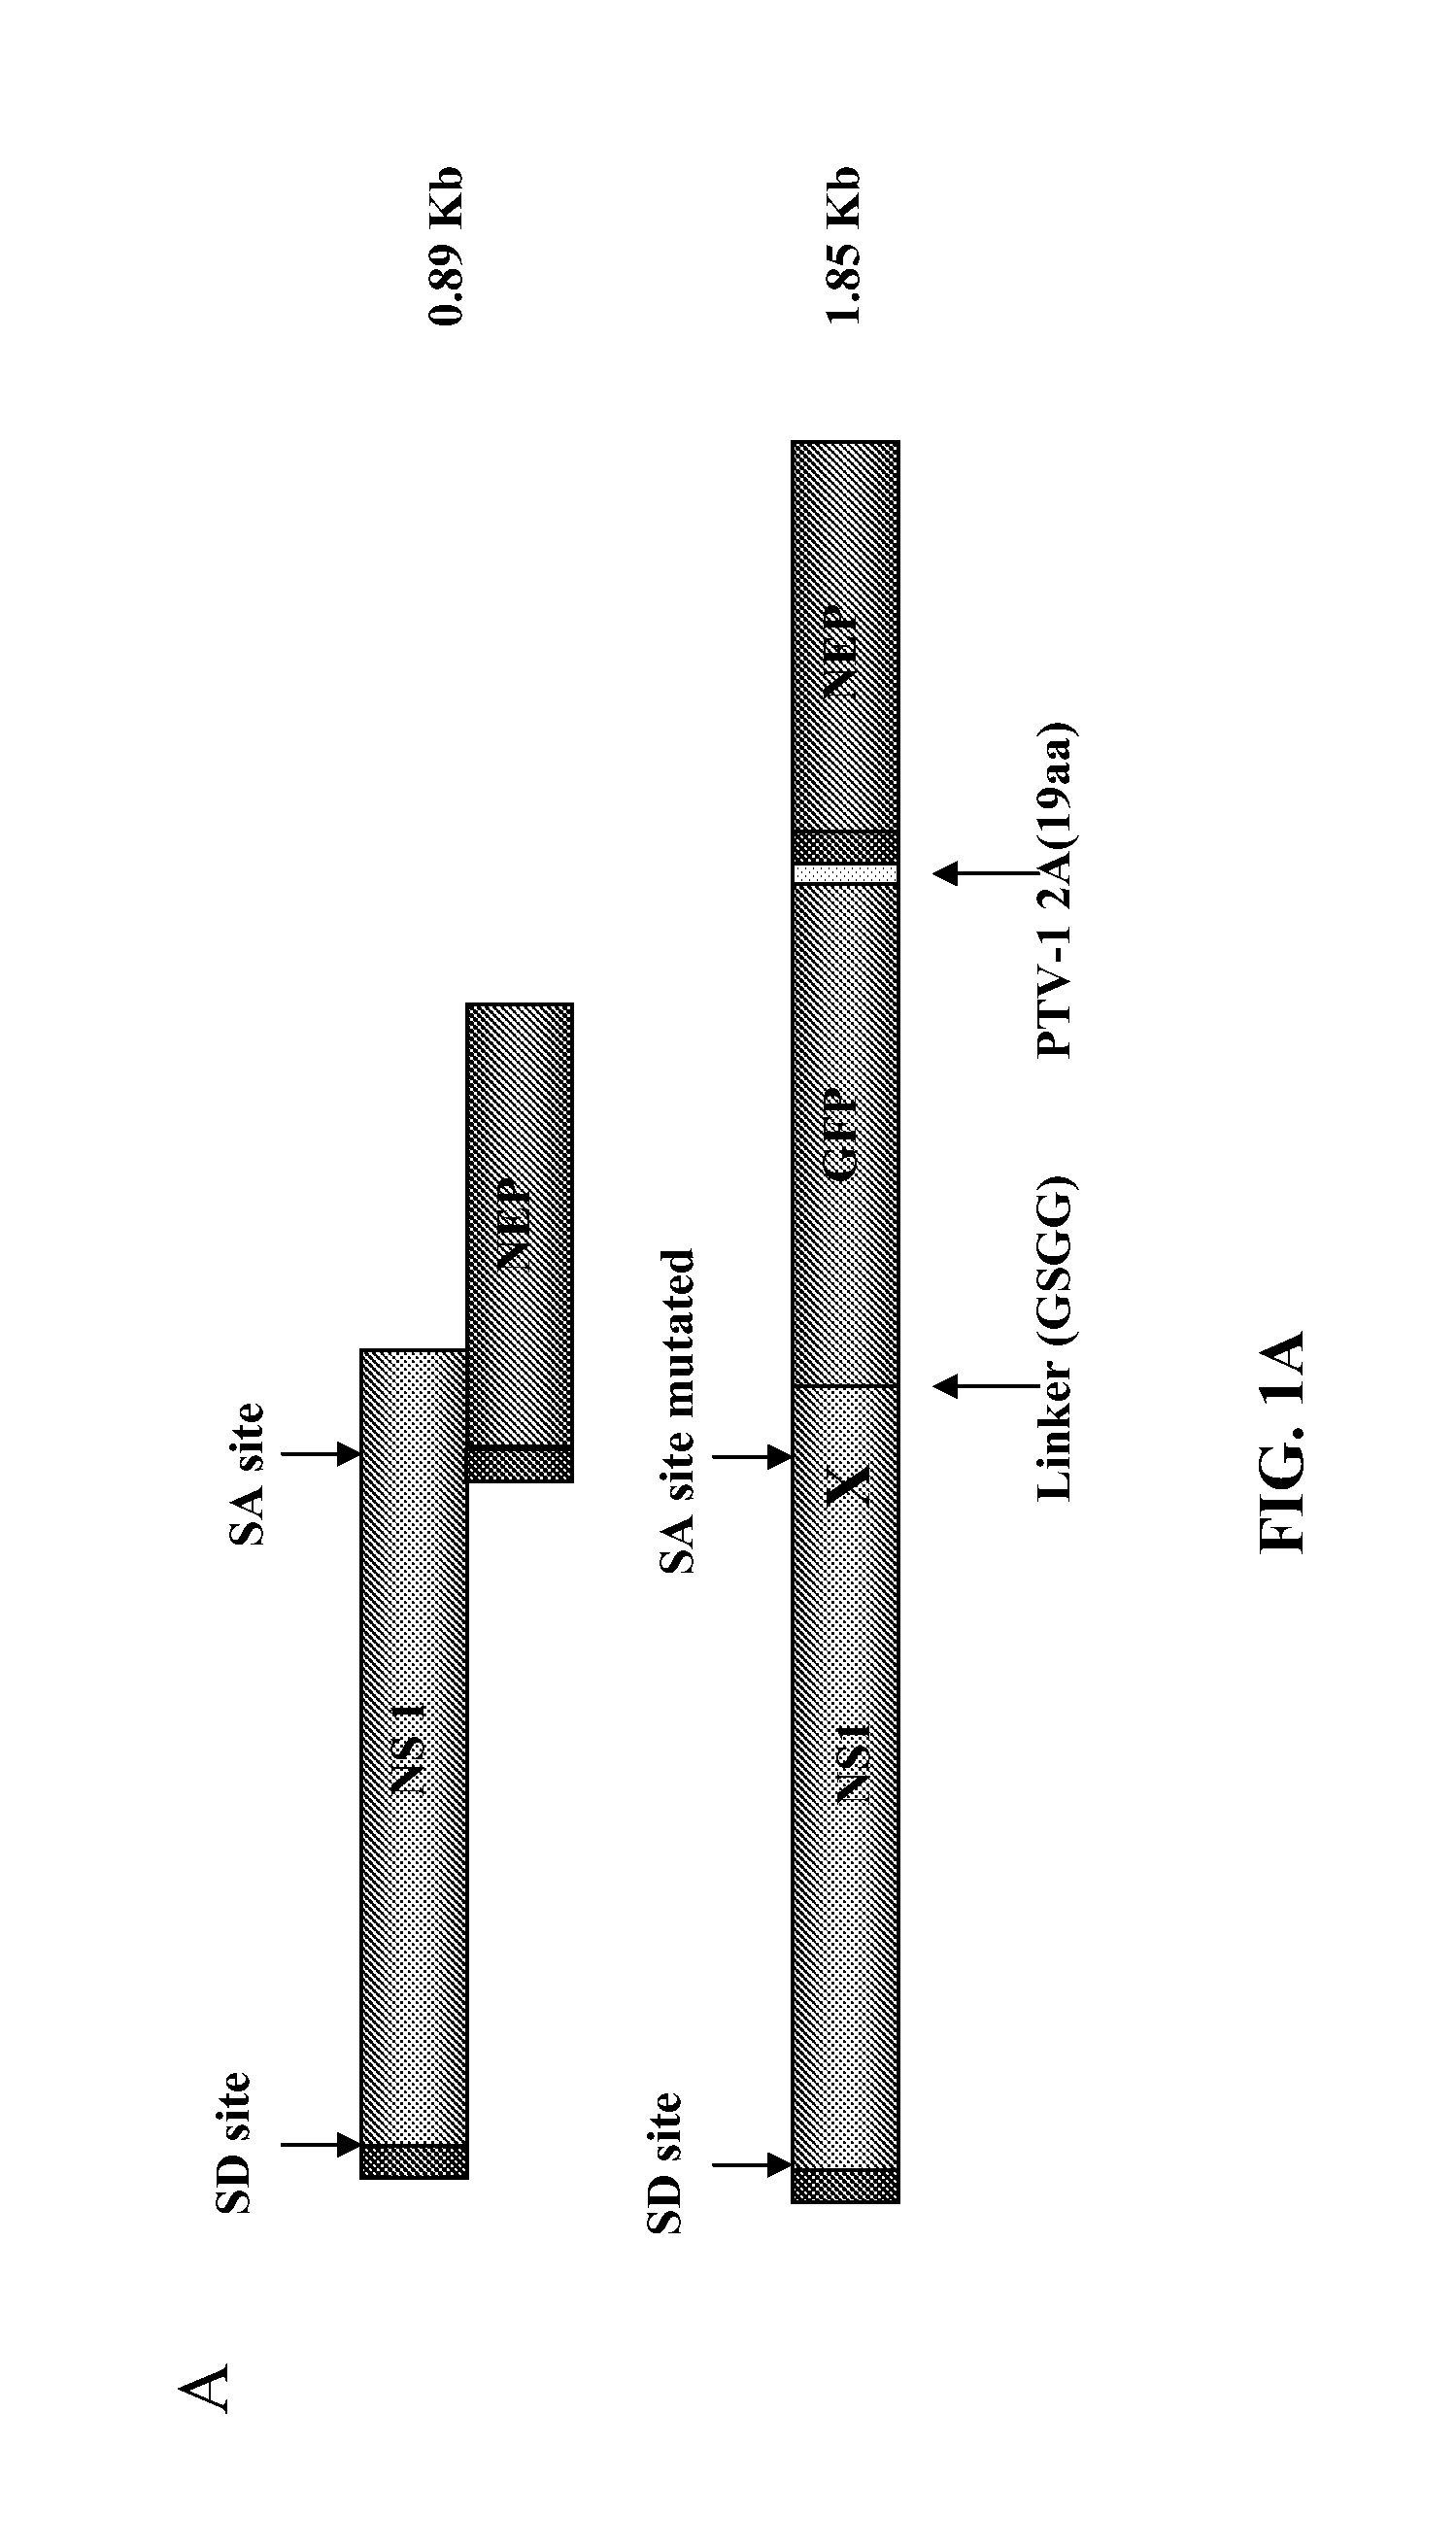 Recombinant influenza viruses and uses thereof